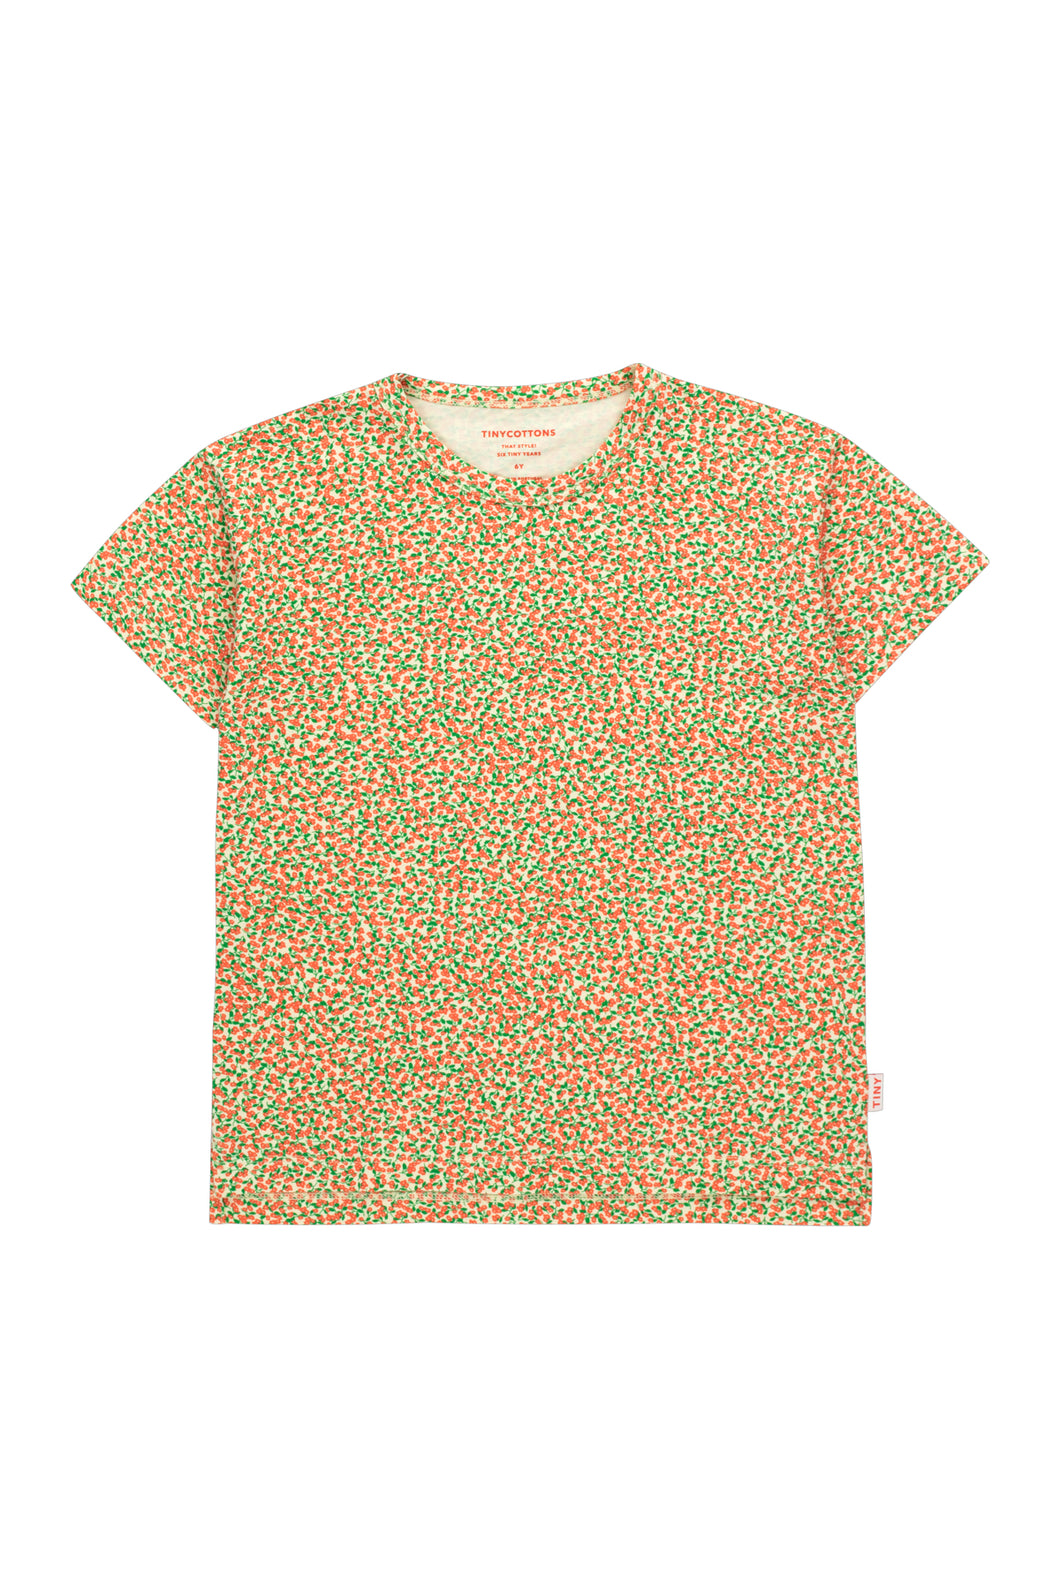 Tinycottons MEADOW TEE pastel yellow/summer red